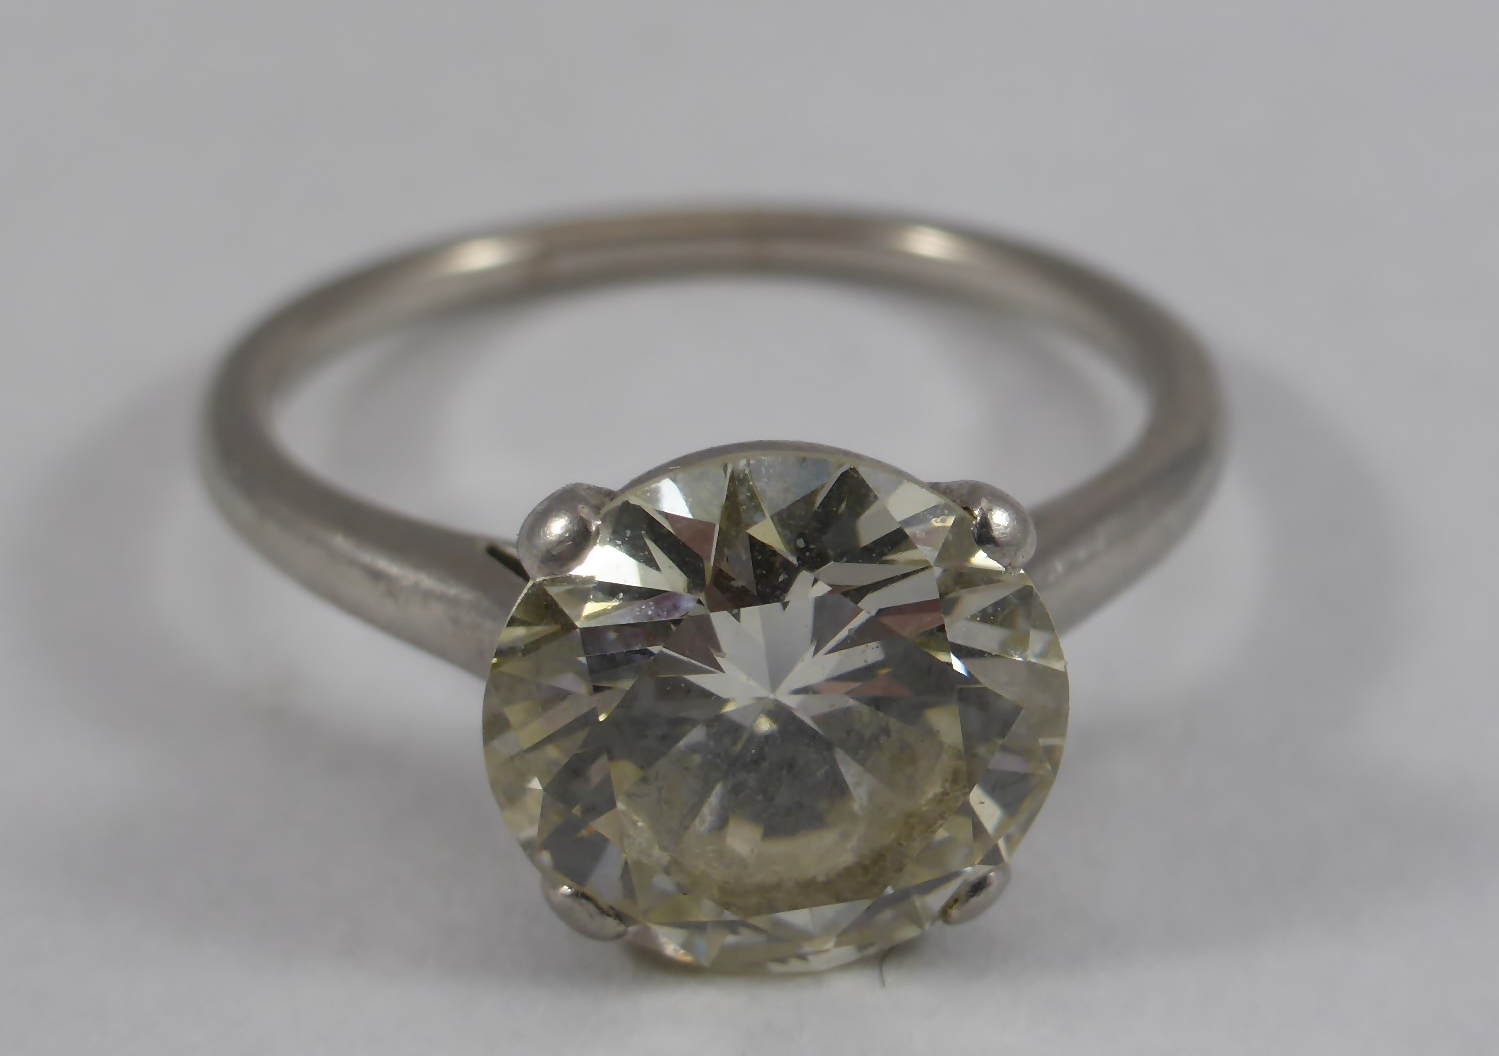 Solitaire Diamond Ring Sold at Auction